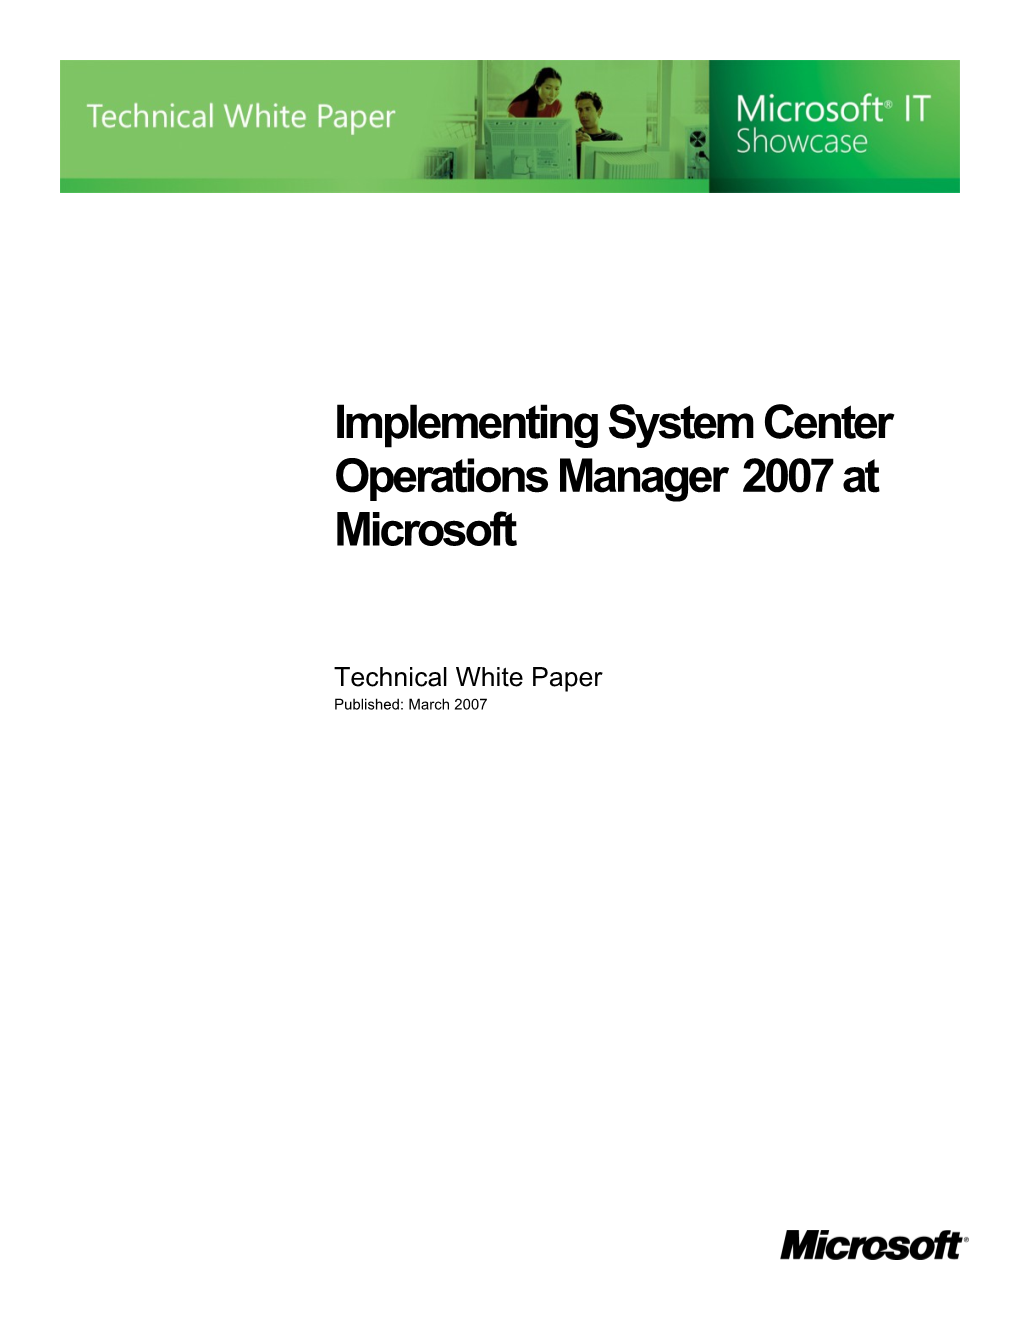 IT Showcase: Implementing System Center Operations Manager 2007 at Microsoft Technical